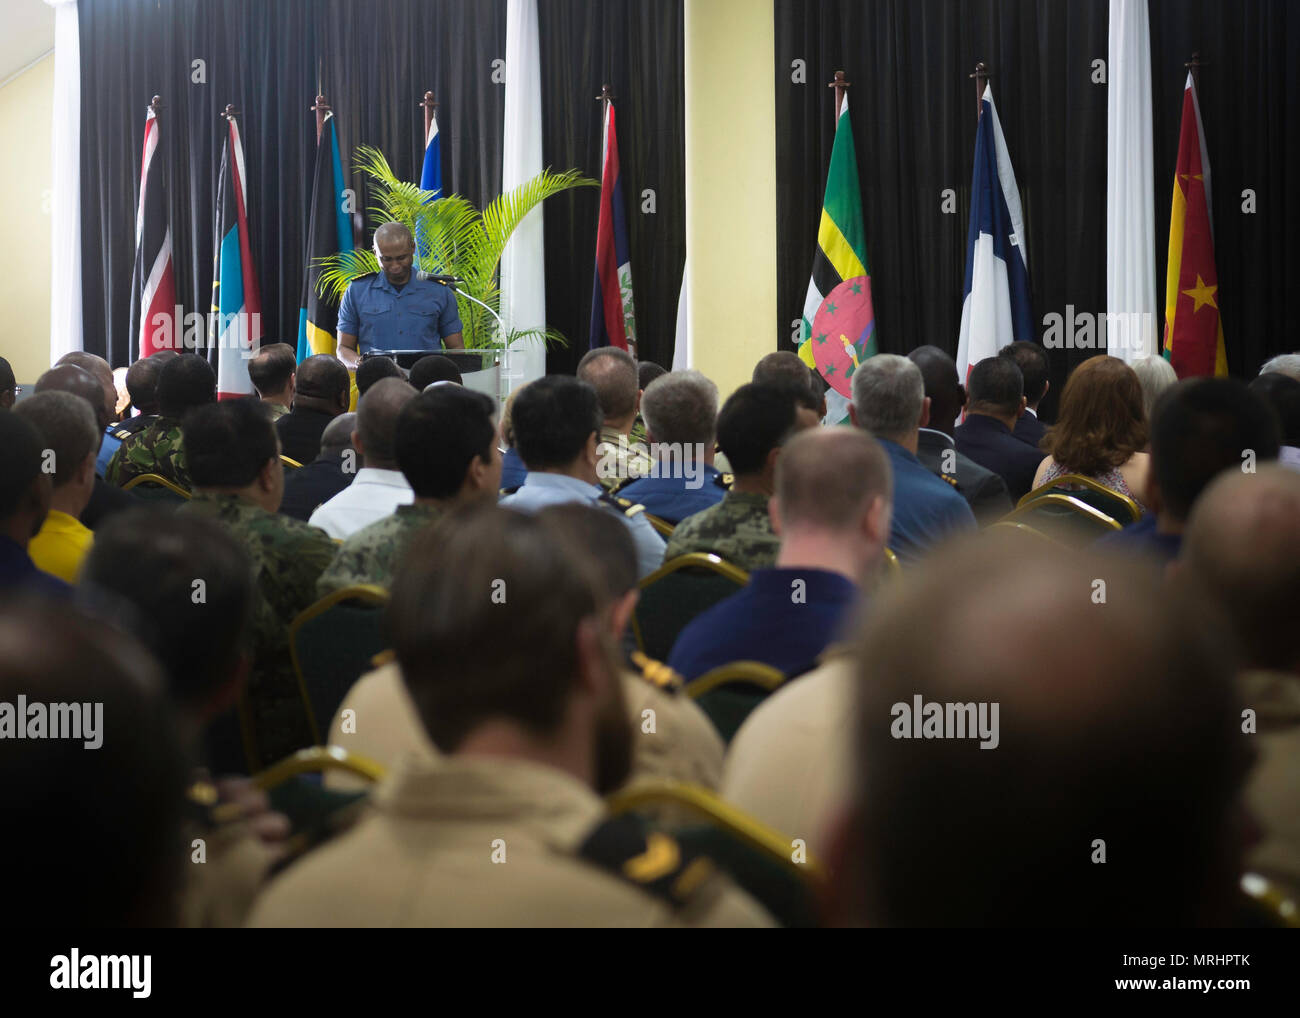 PORT OF SPAIN, Trinidad - Captain (Navy) Hayden Pritchard, Trinidad and Tobago Chief of Defence Staff, addresses attendees during Exercise TRADEWINDS 17 closing ceremony in Chaguaramas, Trinidad and Tobago on June 17, 2017. (Canadian Forces Joint Imagery Centre photo by Avr Desiree T. Bourdon) Stock Photo